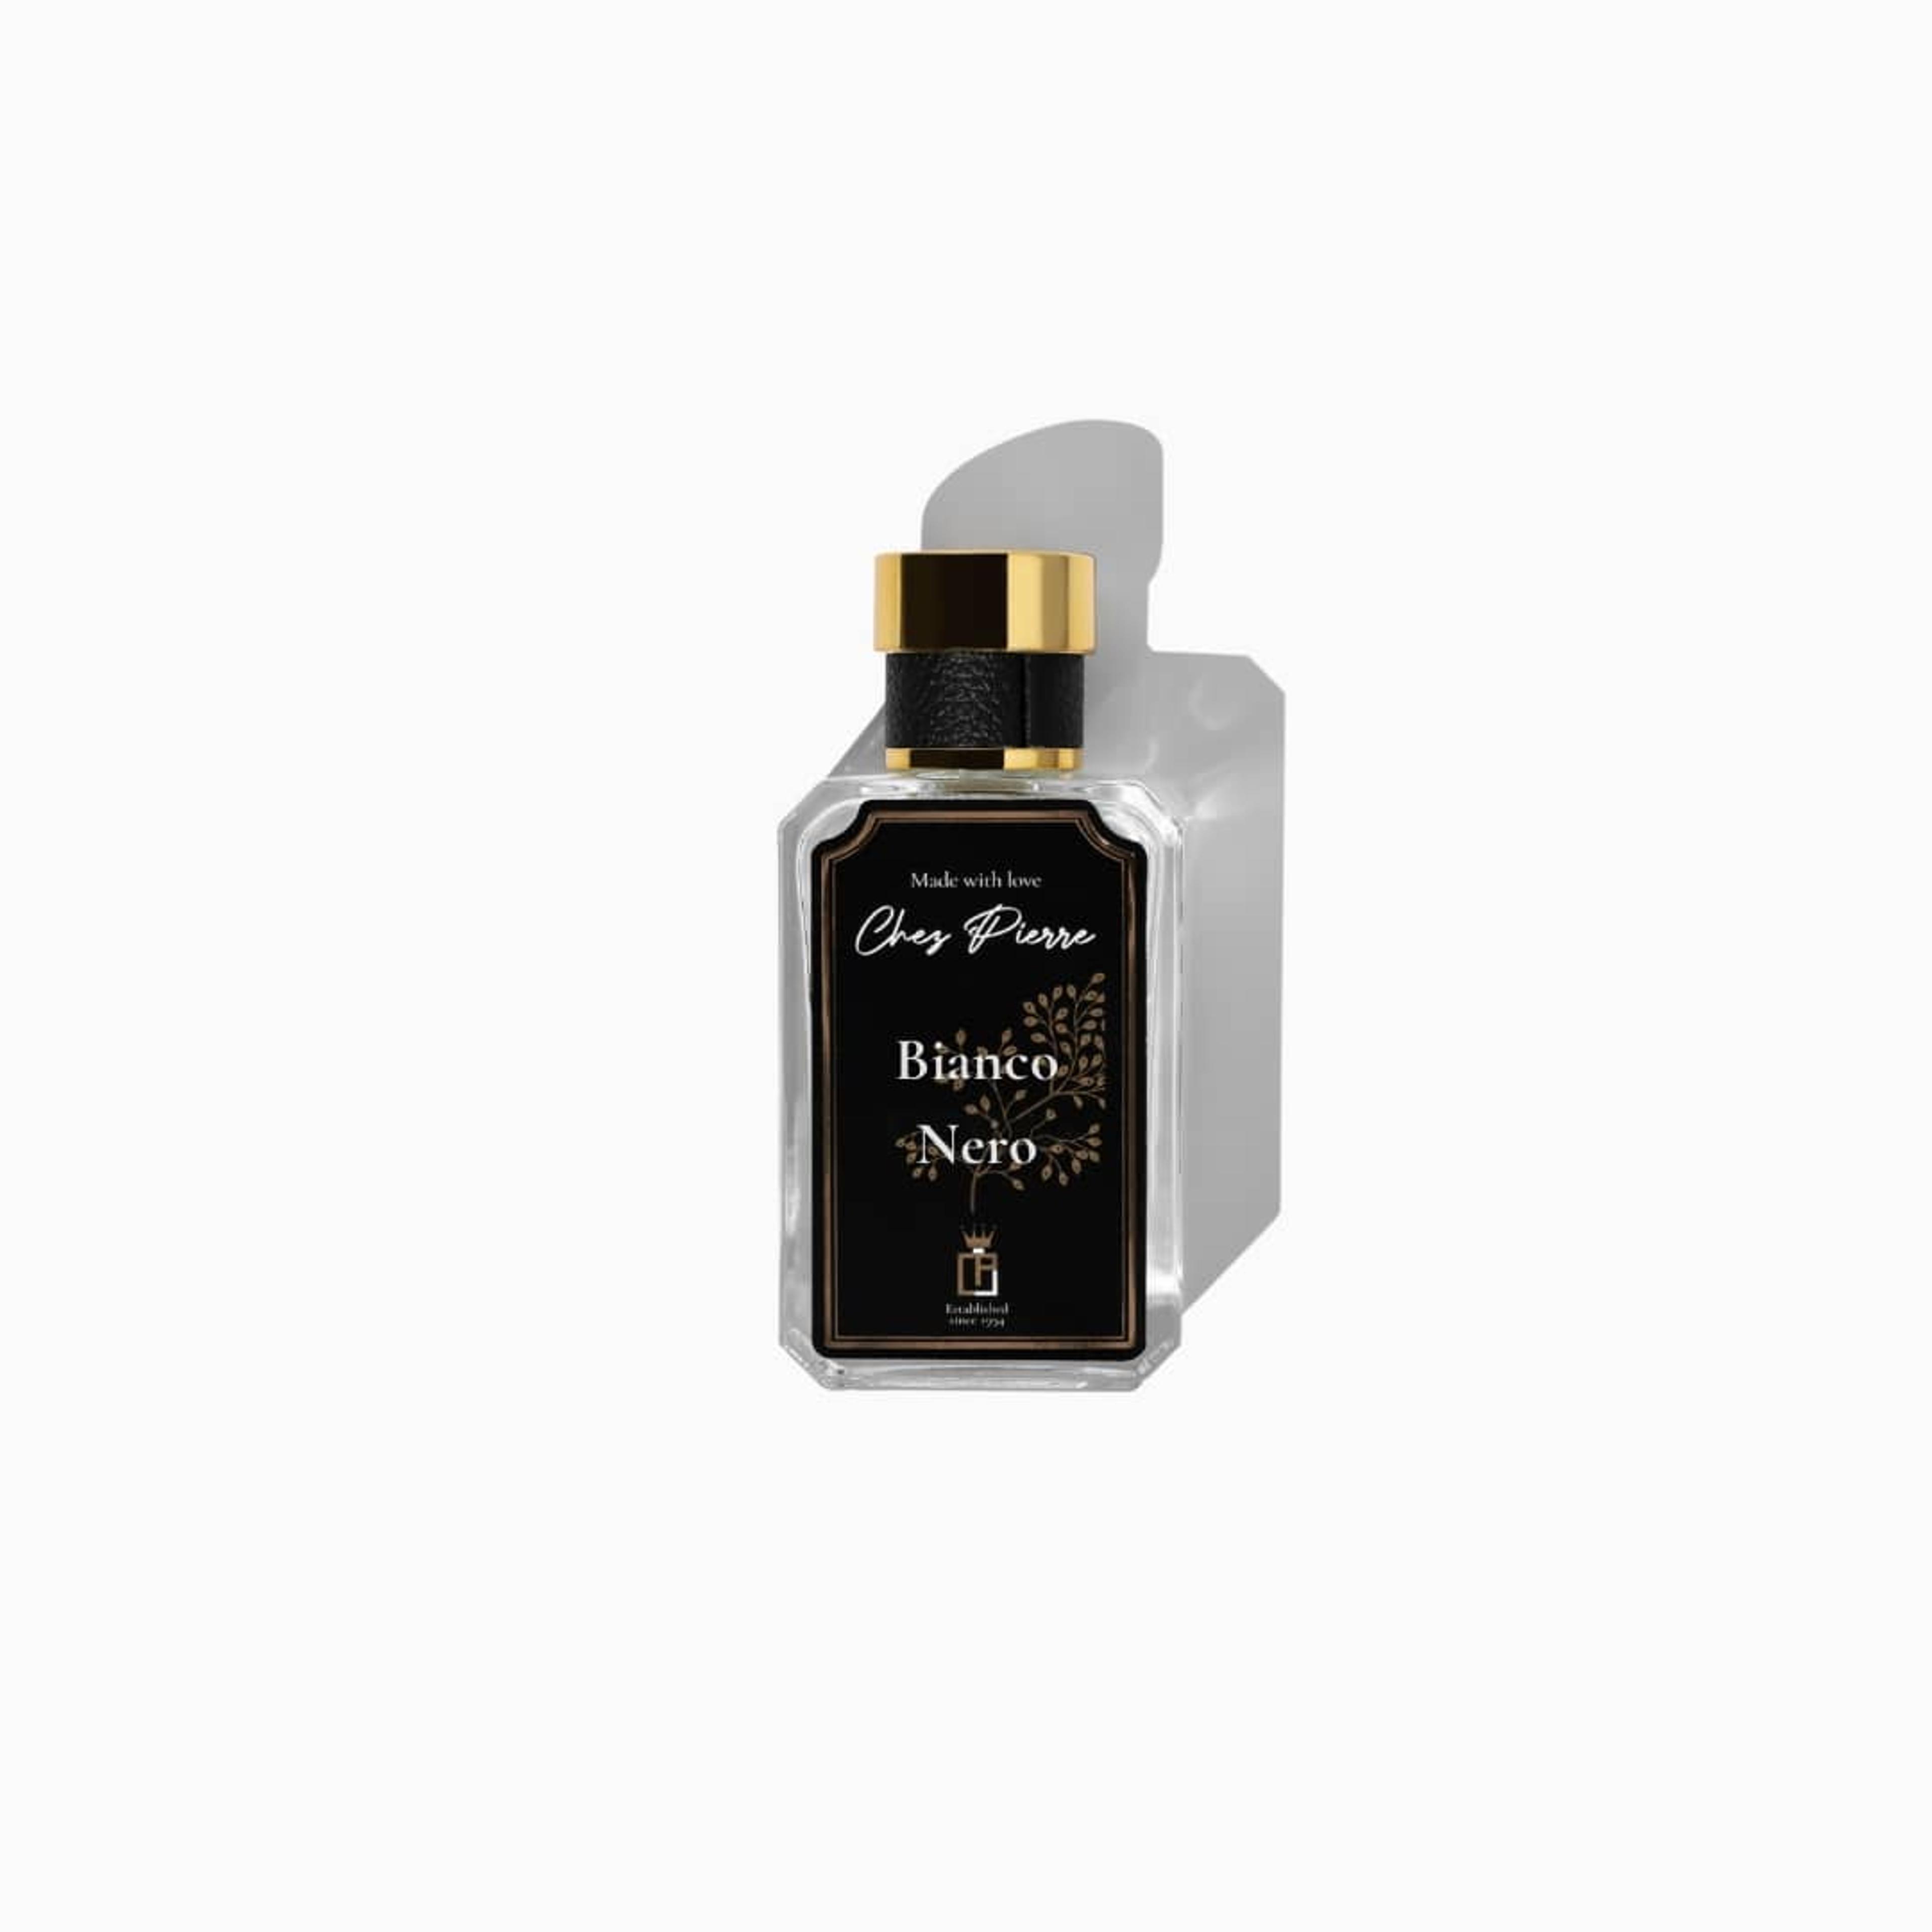 Chez Pierre's Bianco Nero Perfume Inspired By Tom Ford White Suede